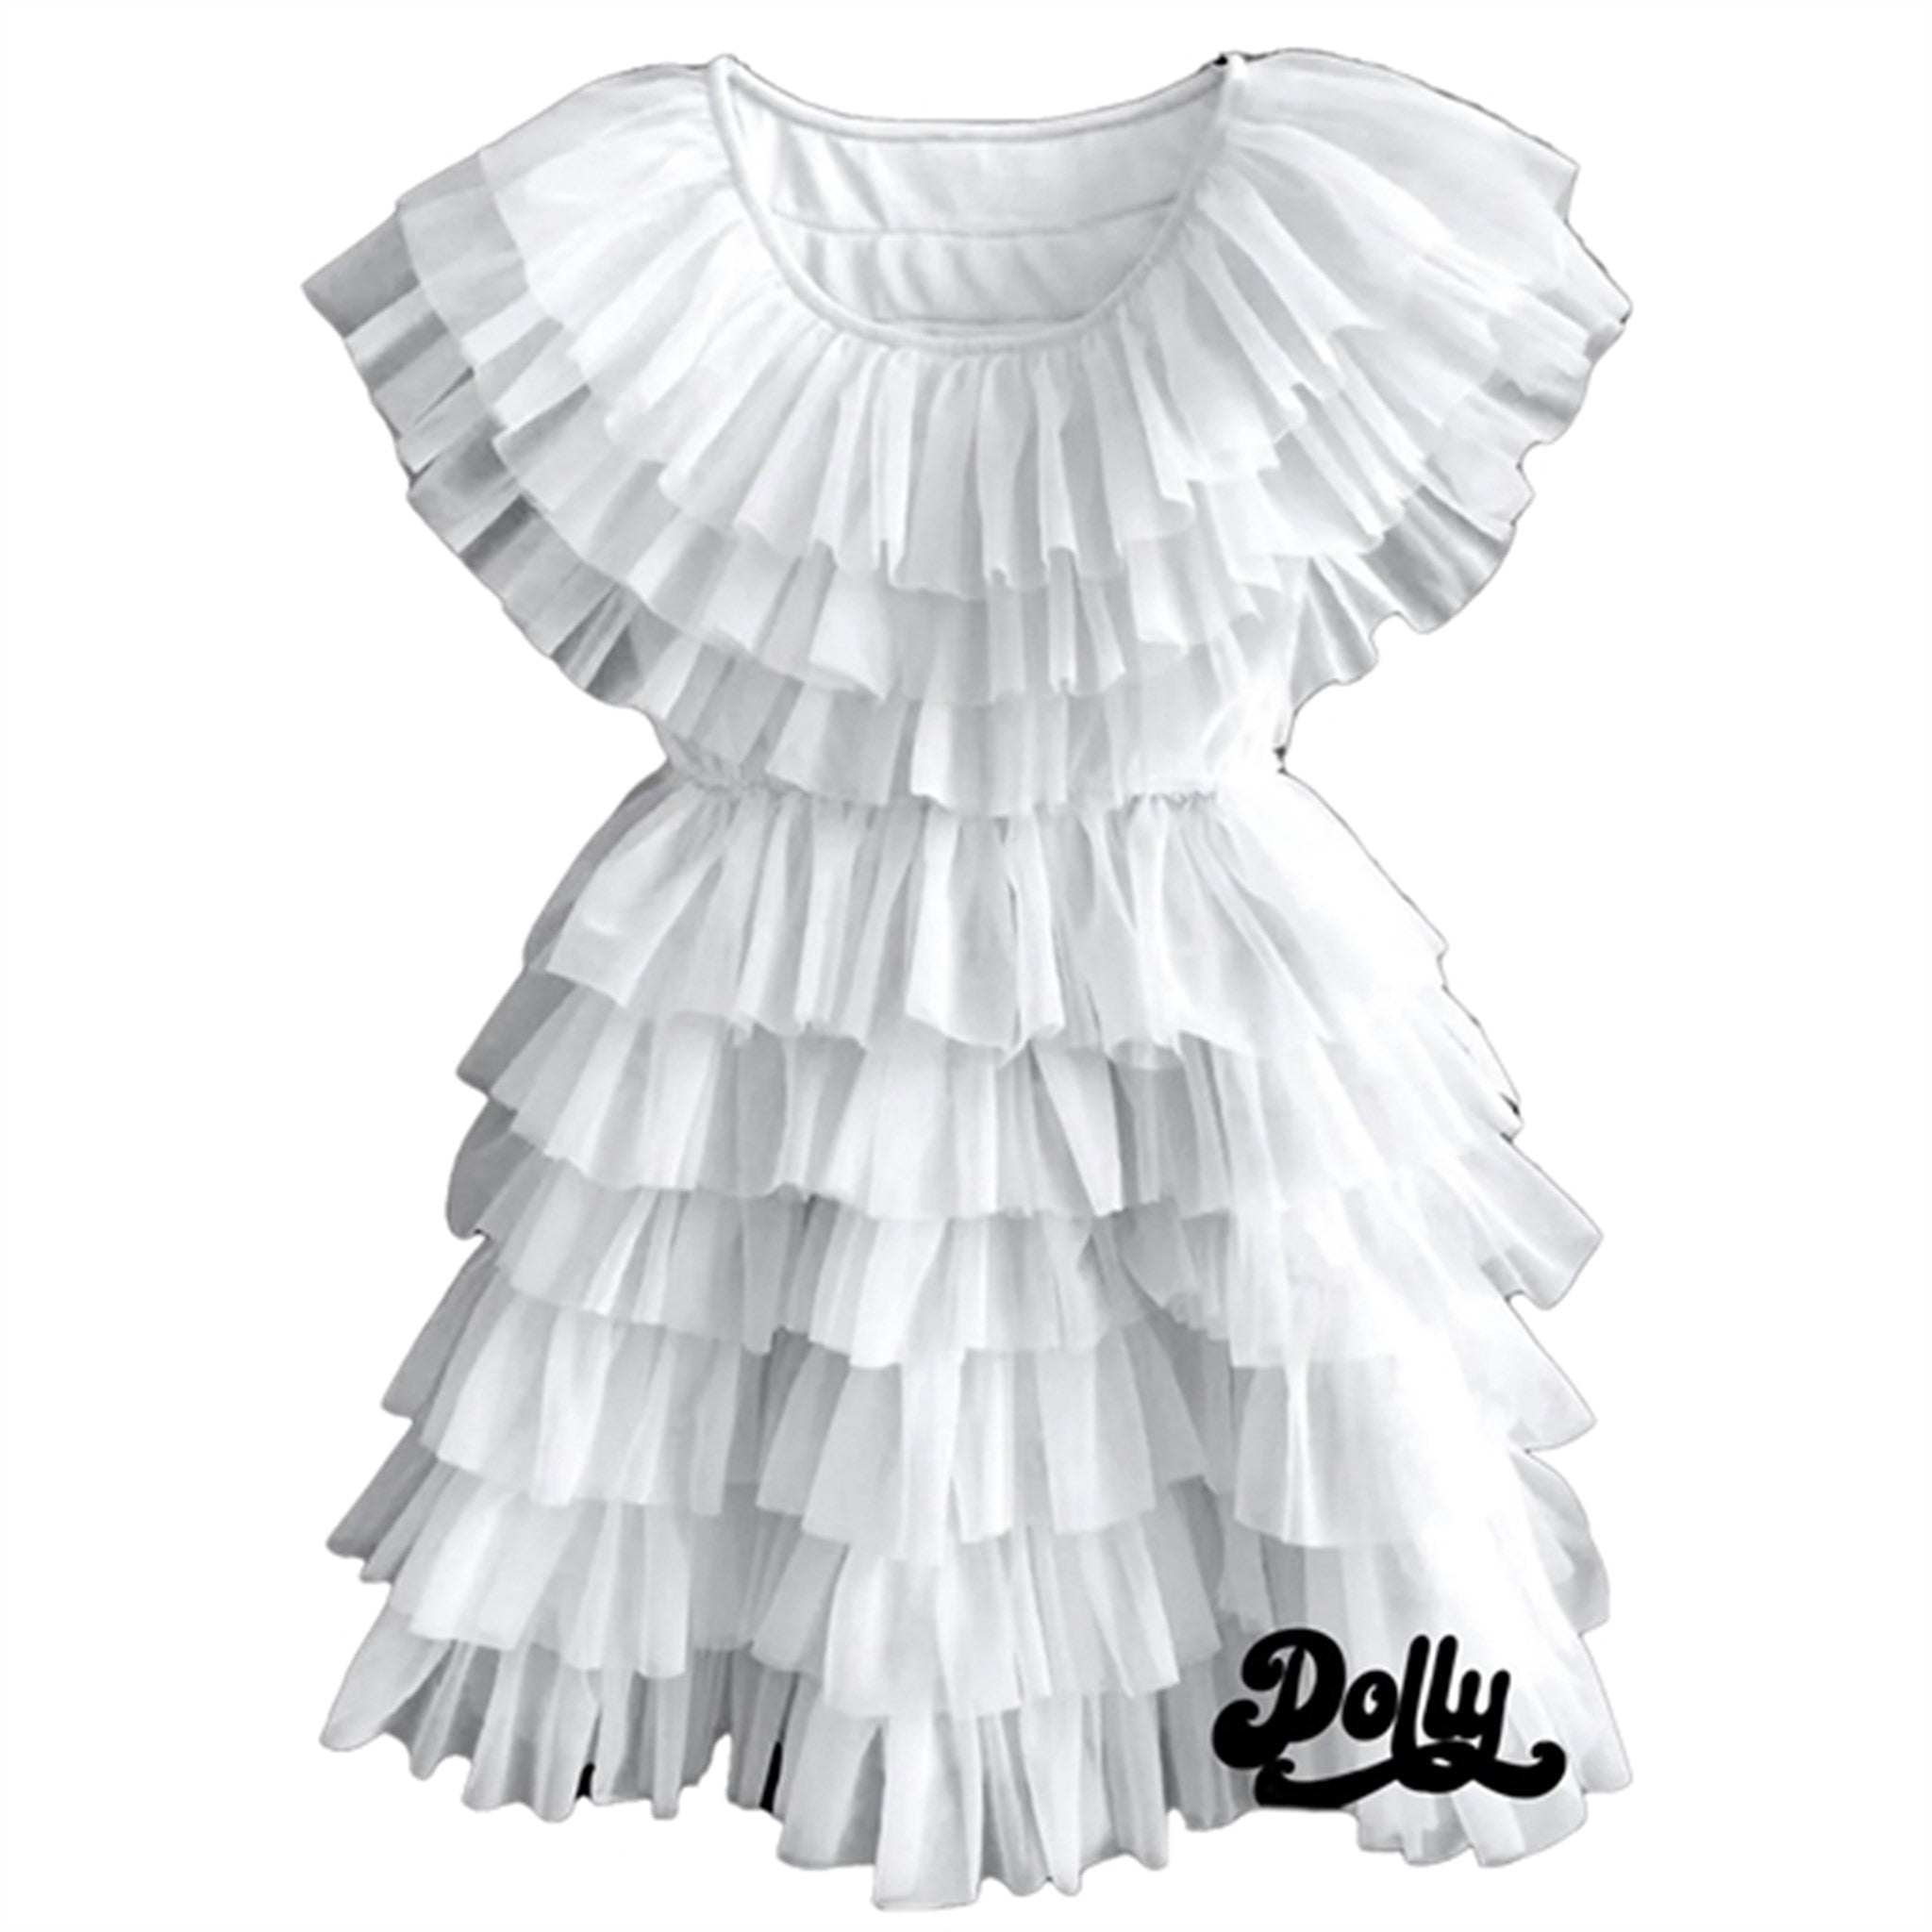 Dolly By Le Petit Tom Dolly Delicious Cake Klänning Whipped Cream White